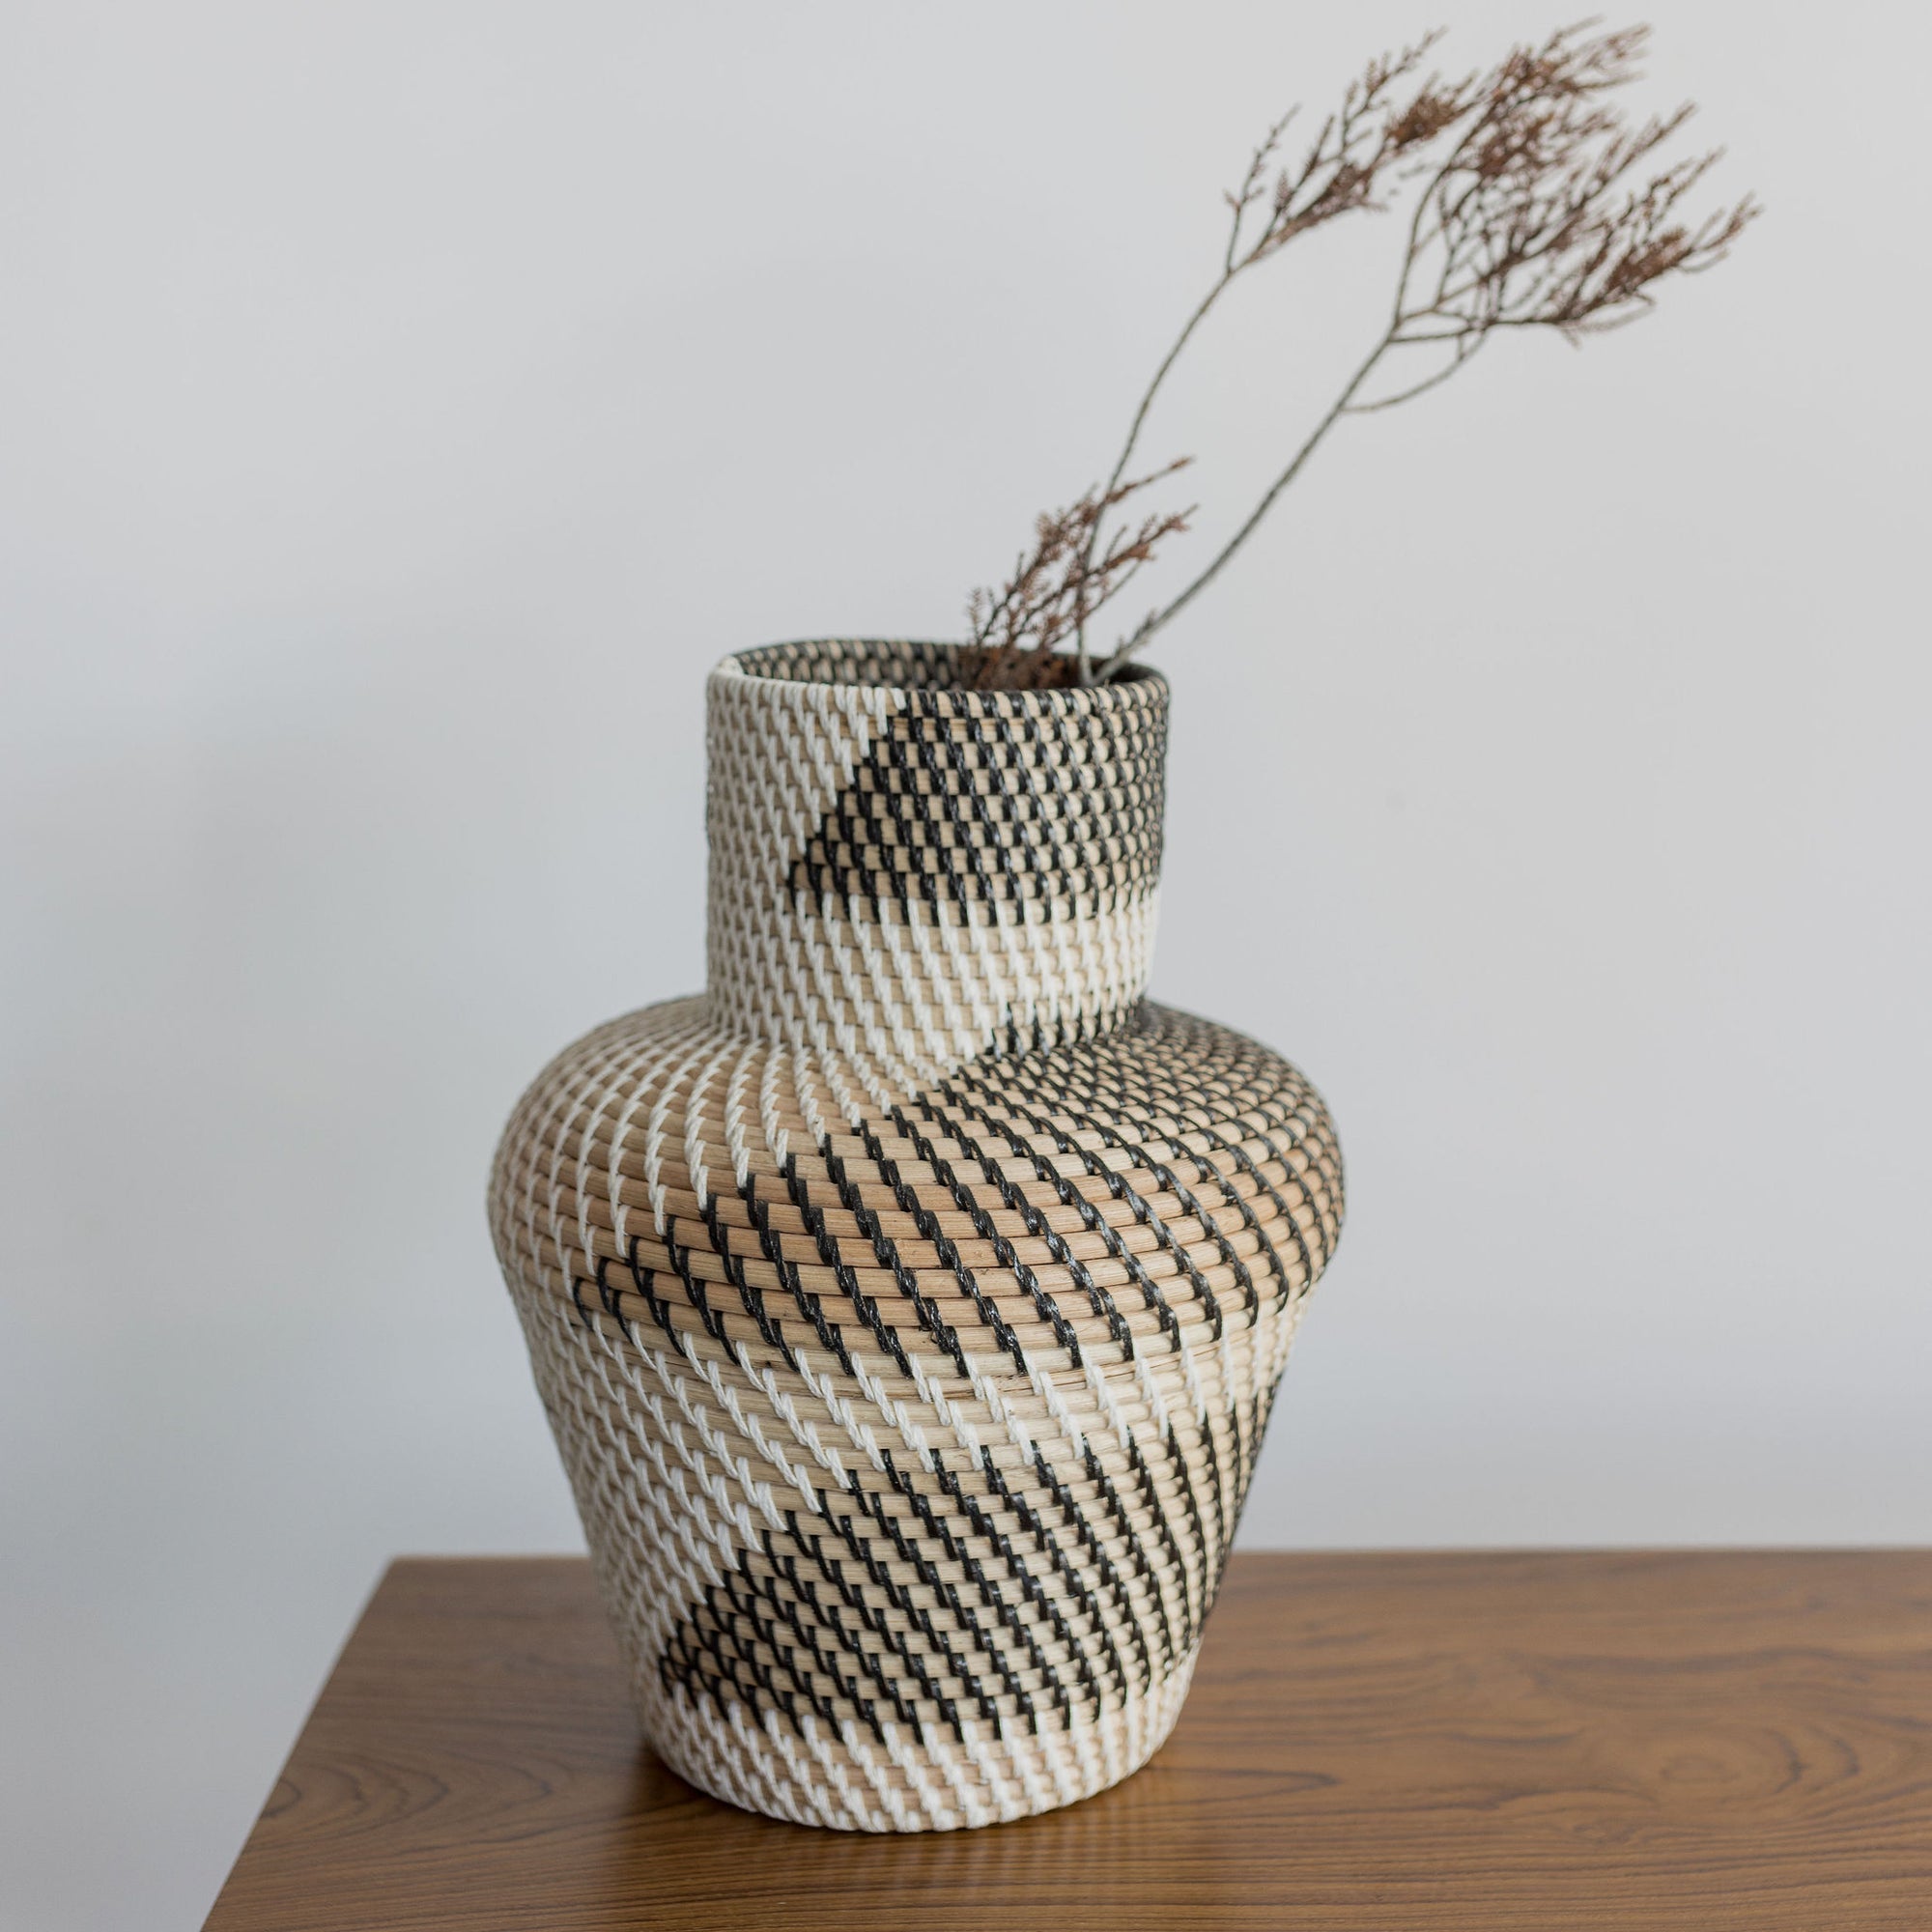 black and white rattan vase from corcovado furniture store online new zealand